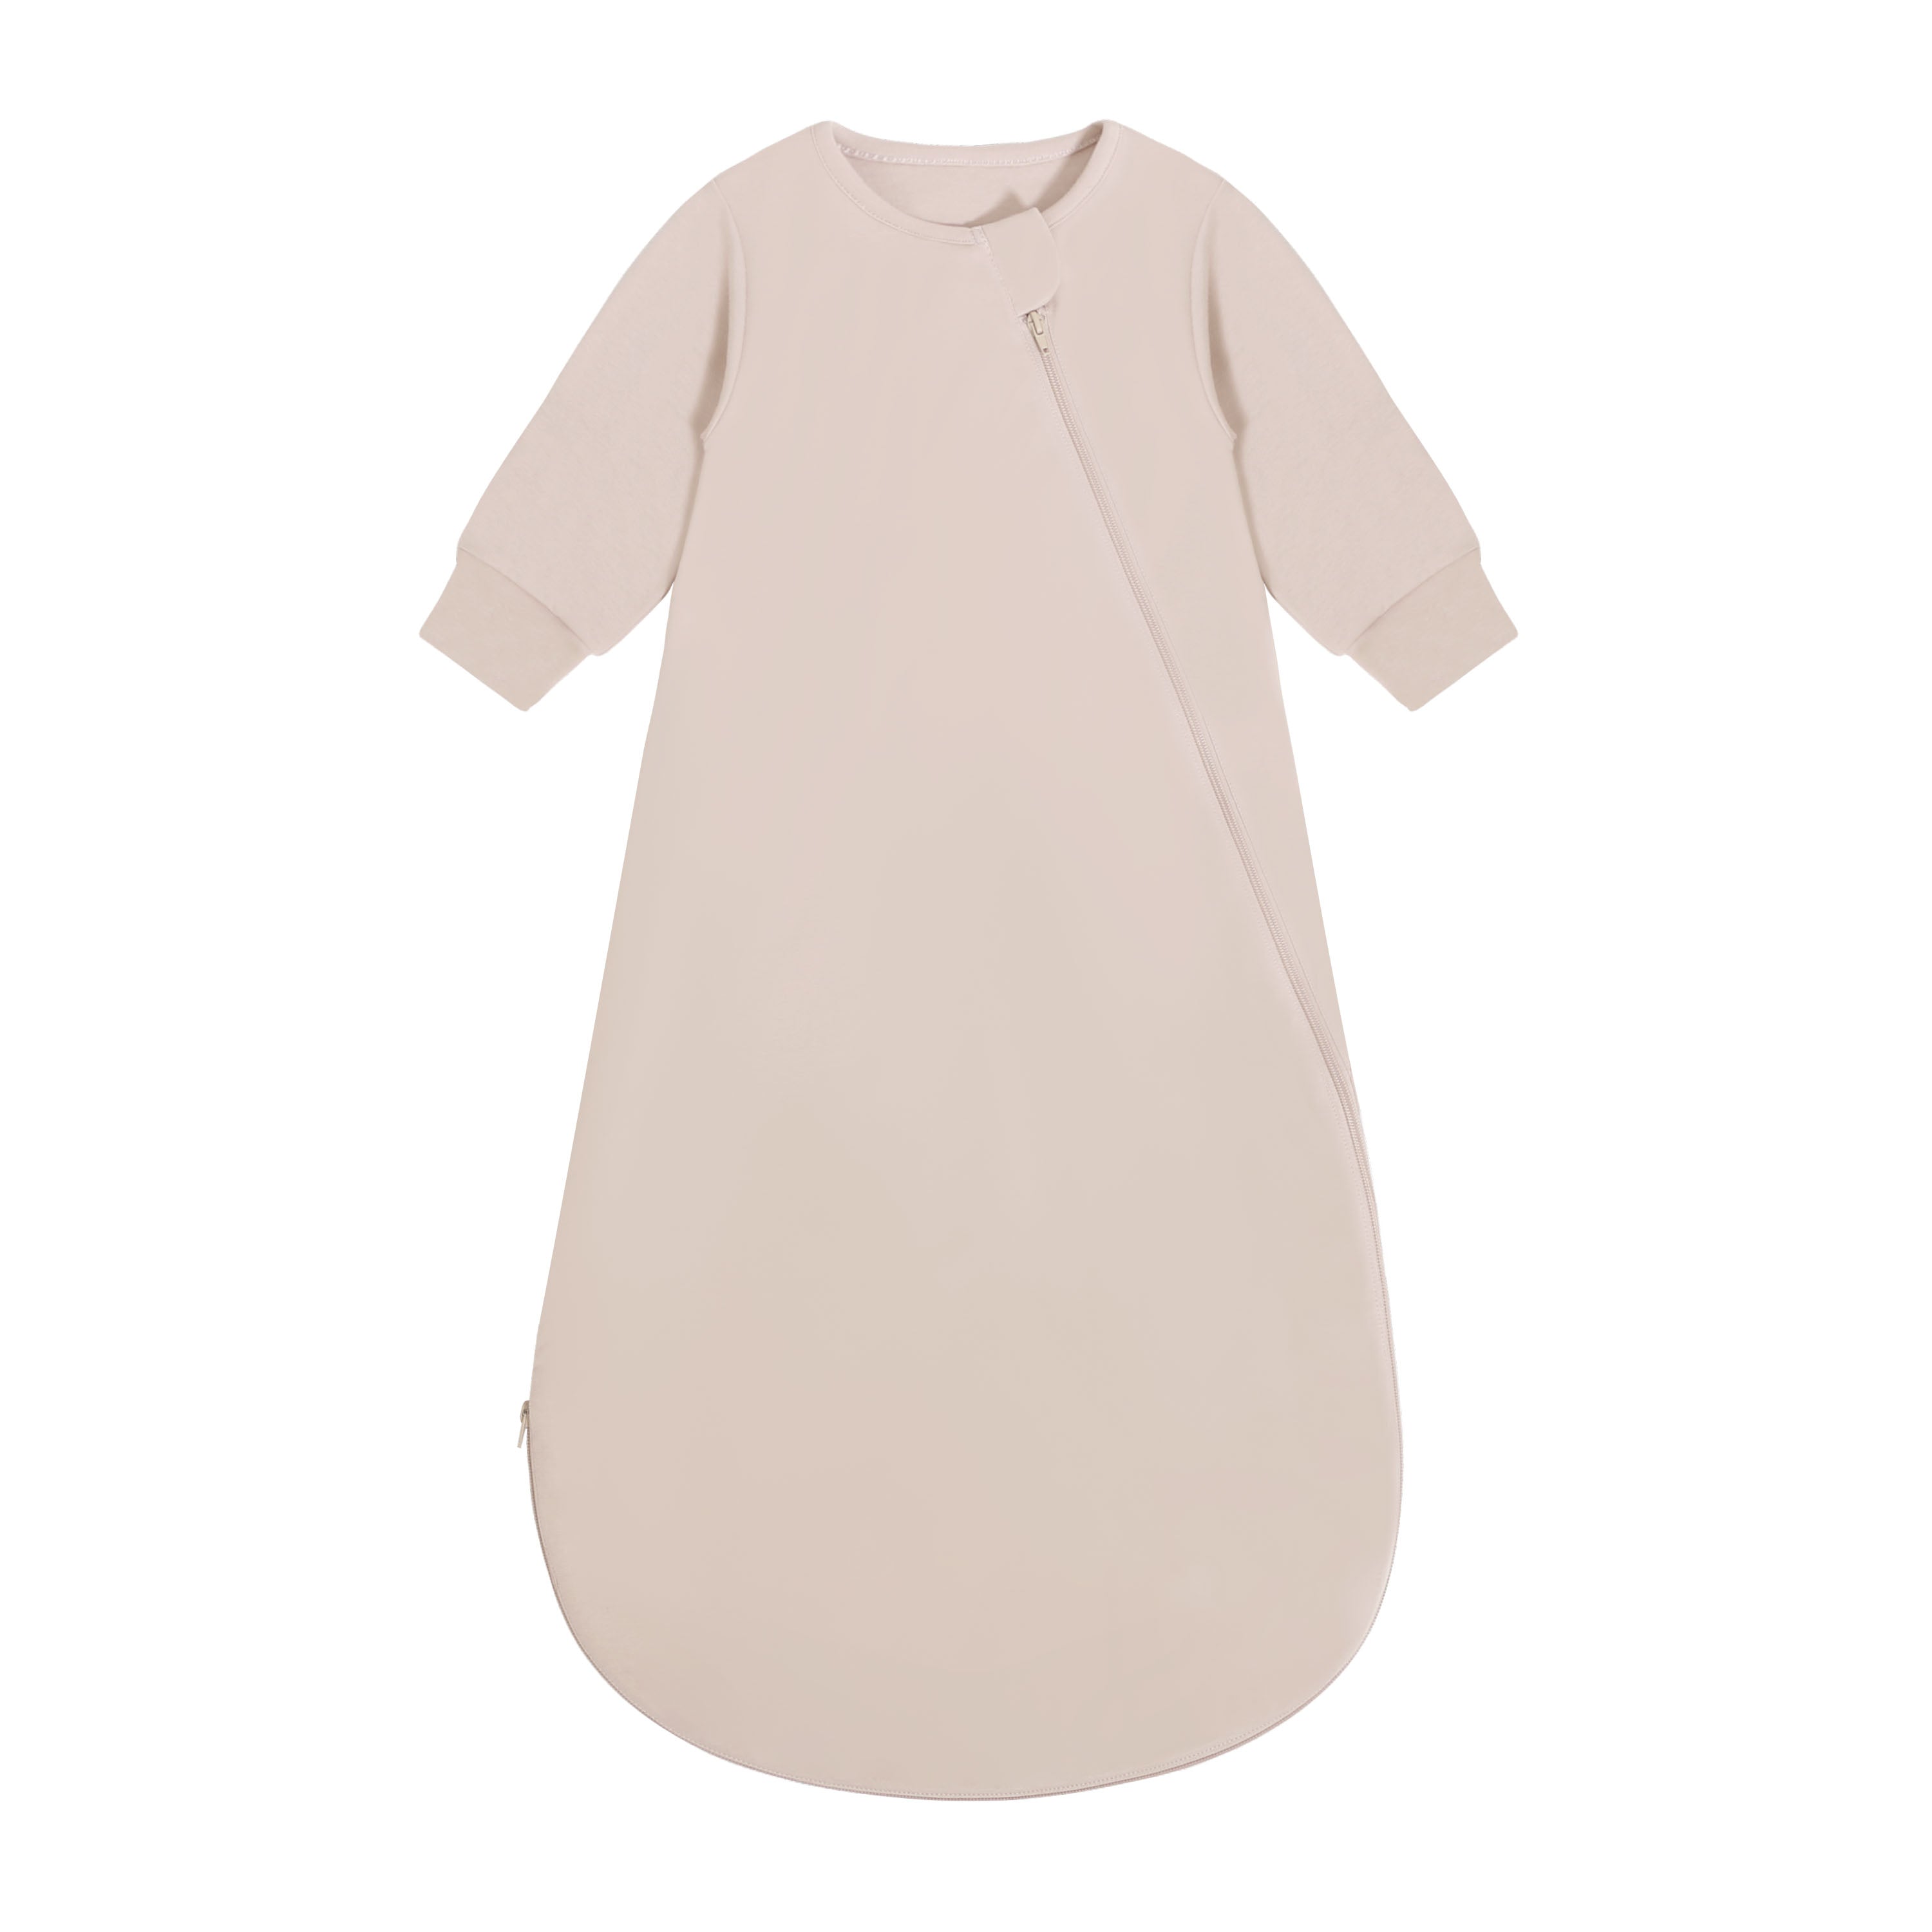 Camel Wool Winter Sleep Sack With Arms 3.5 TOG - Dusty Pink